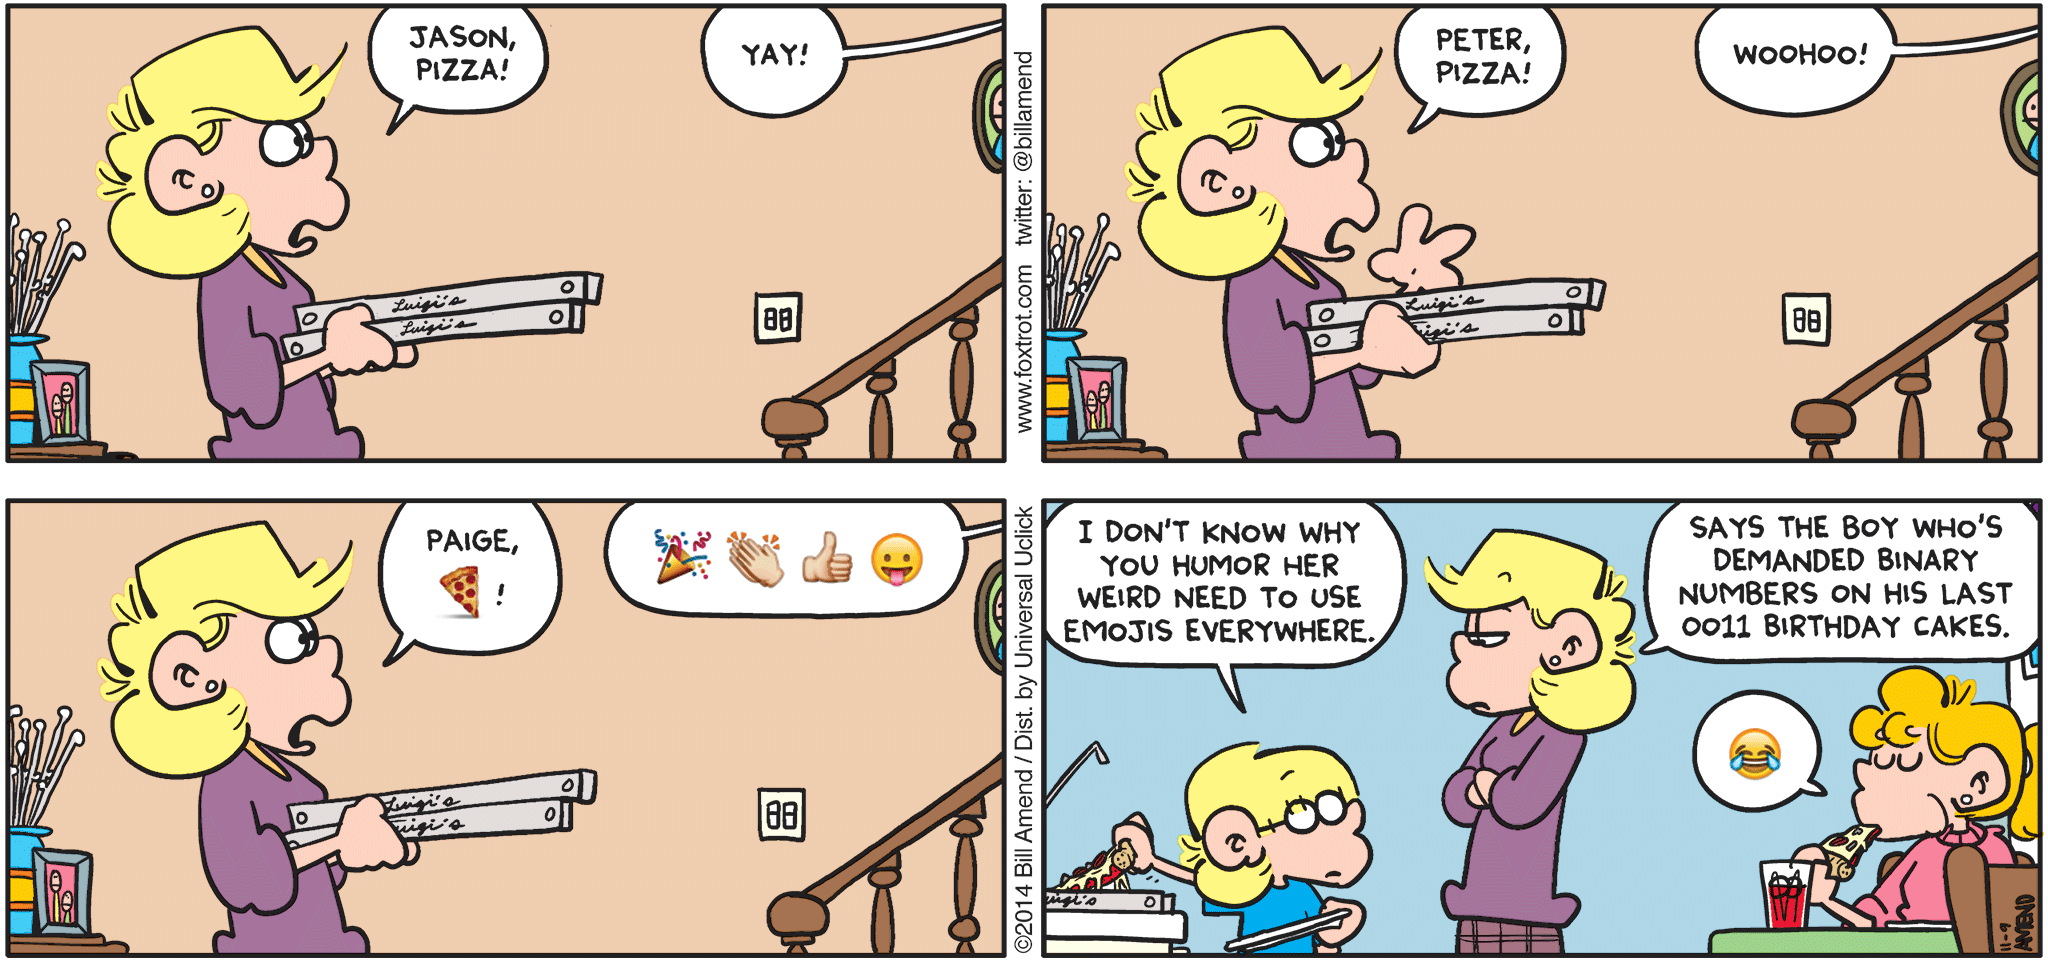 FoxTrot by Bill Amend - "Paige Goes Emo" published November 9, 2014 - Andy: Jason, pizza! Jason: Yay! Andy: Peter, pizza! Peter: Woohoo! Andy: (pizza emoji) Paige: (celebration emojis) Jason: I don't know why you humor her weird need to use emojis everywhere. Andy: Says the boy who's demanded binary numbers on his last 0011 birthday cakes. Paige: (cry laugh emoji)